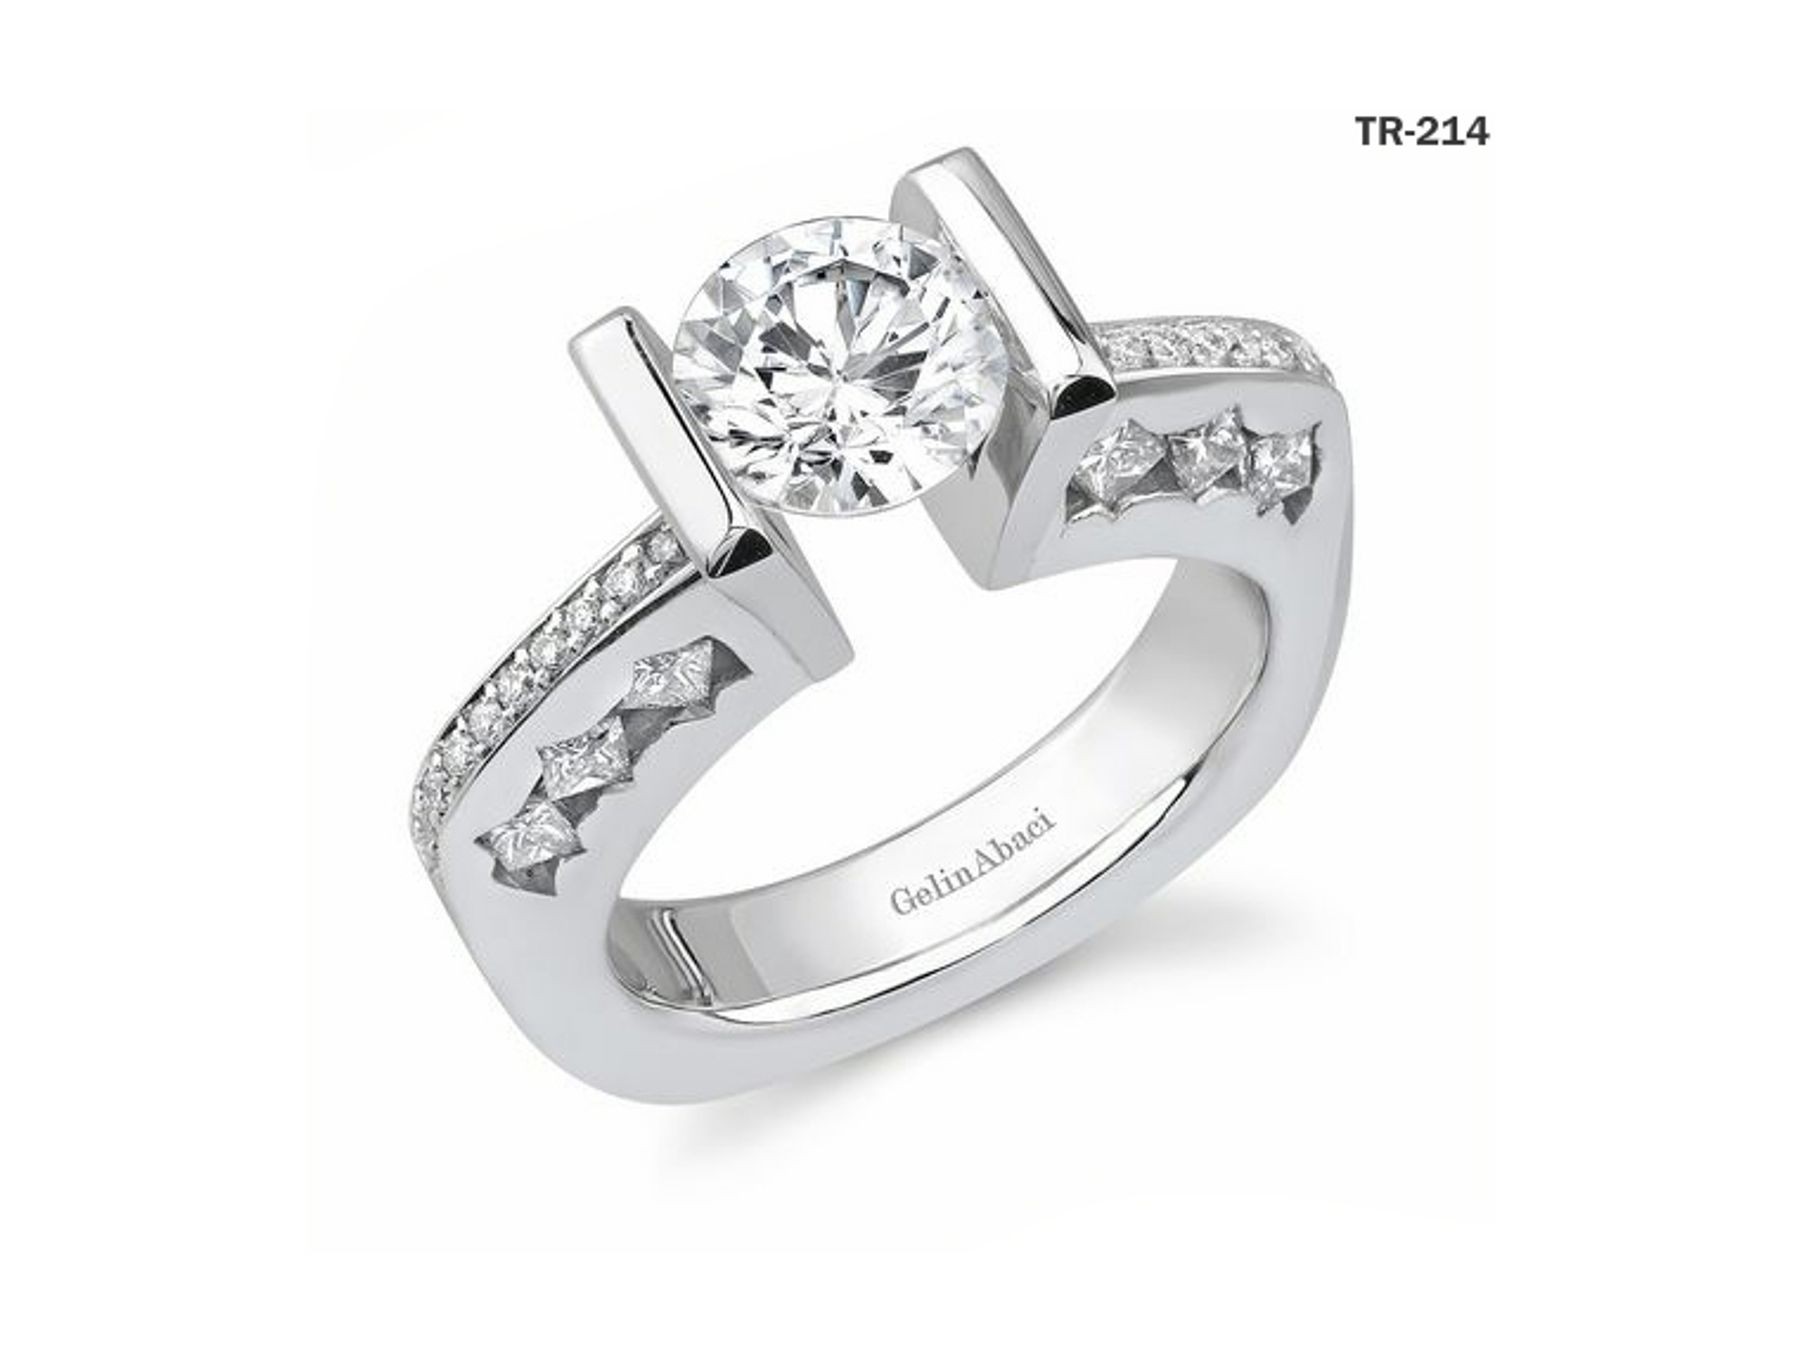 New Style Jewelry: Tension Set Diamond Engagement Rings